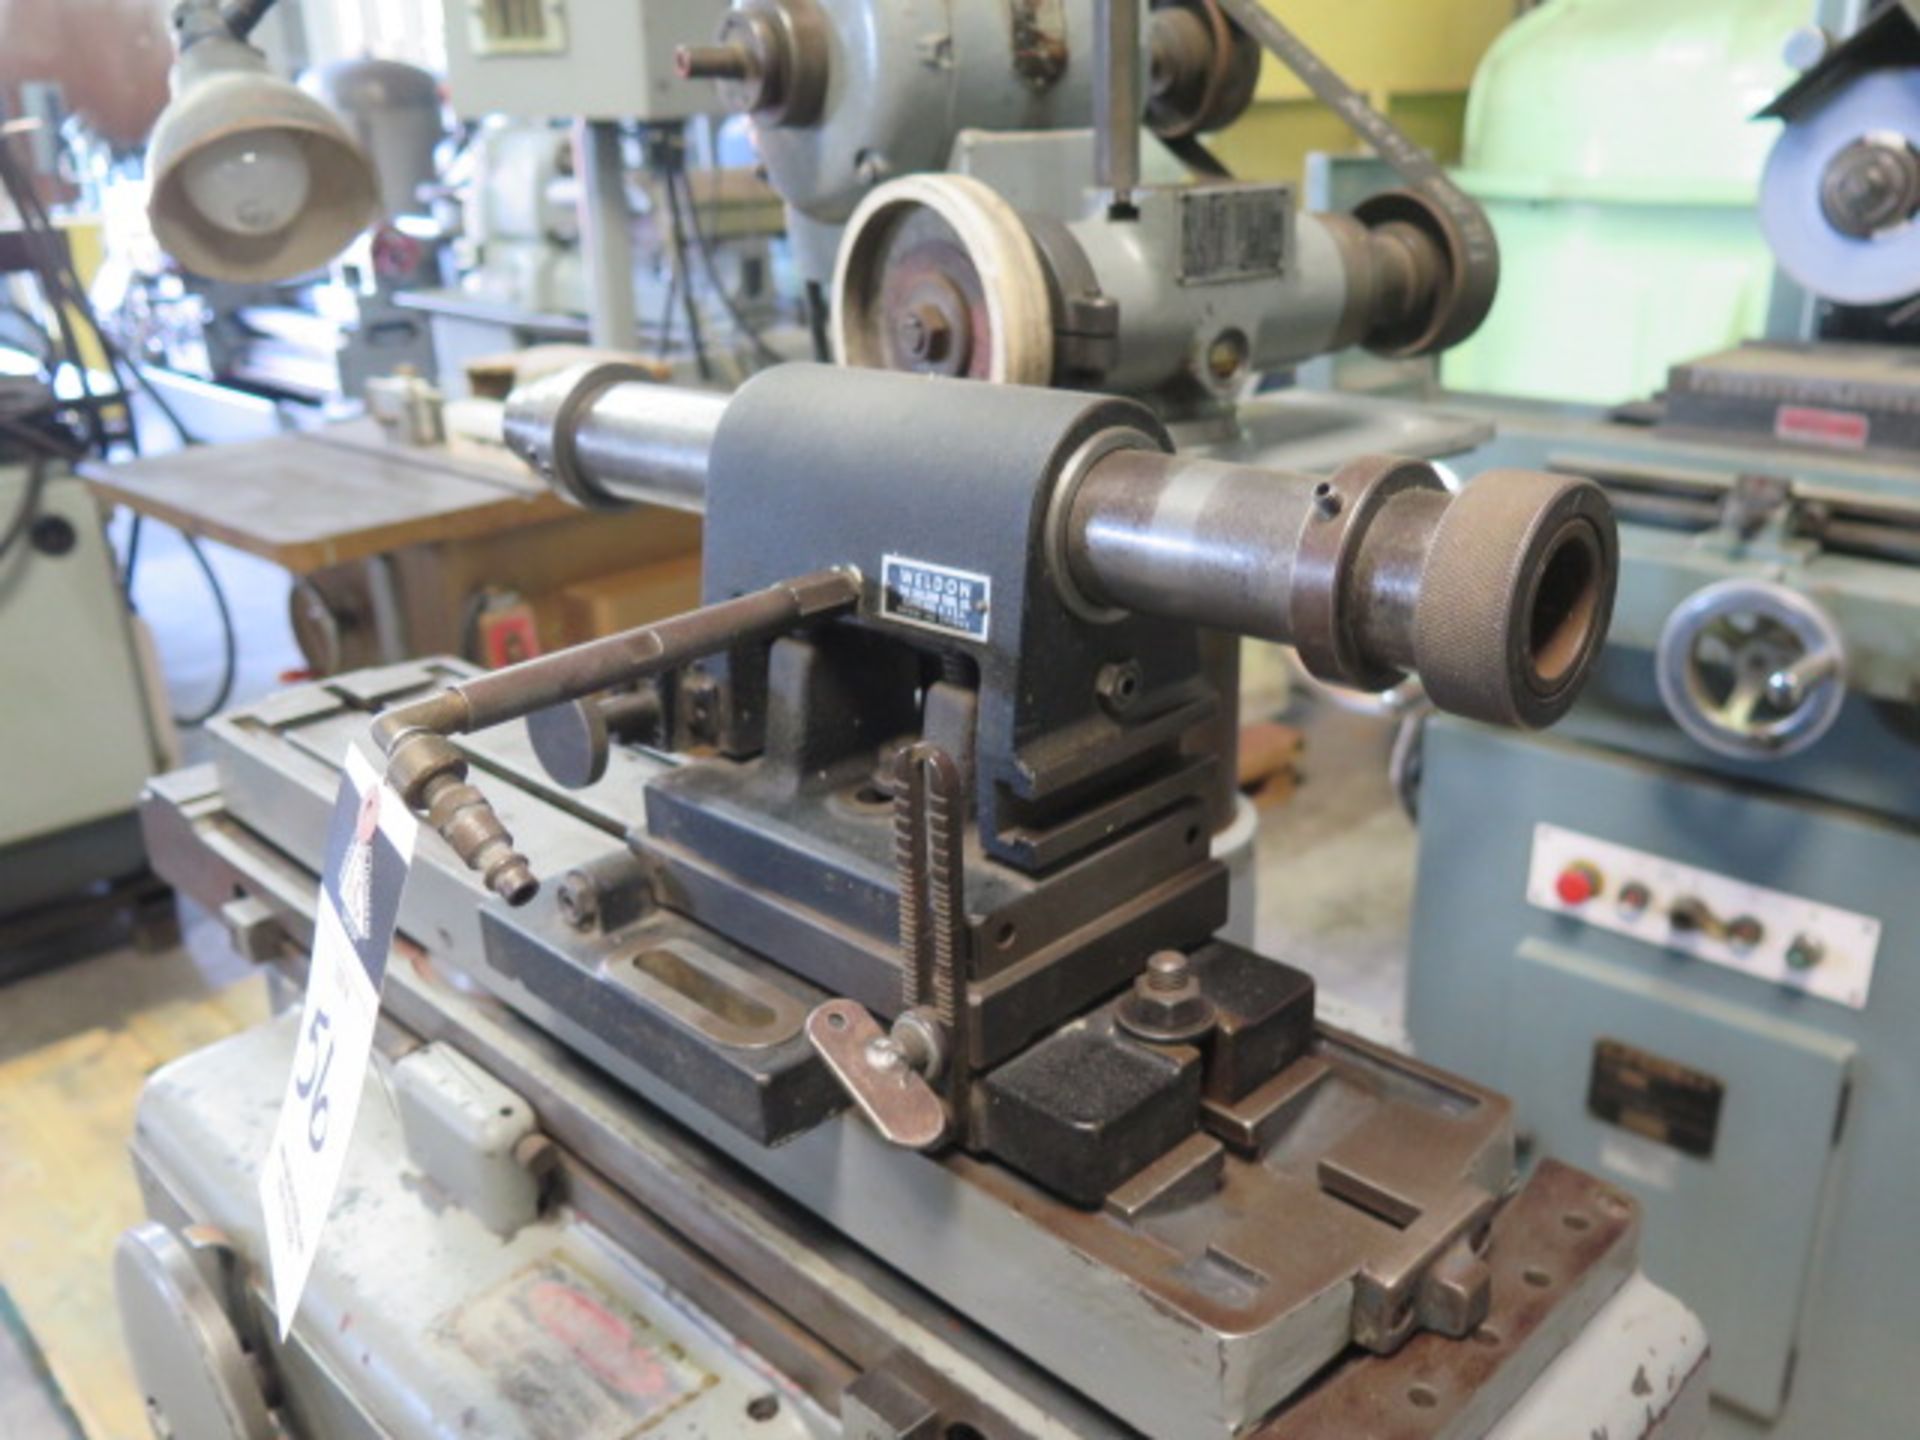 K.O.Lee BA860 Tool and Cutter Grinder s/n 5051 w/Weldon Air Fixture, 5” x 25” Table SOLD AS-IS - Image 5 of 6